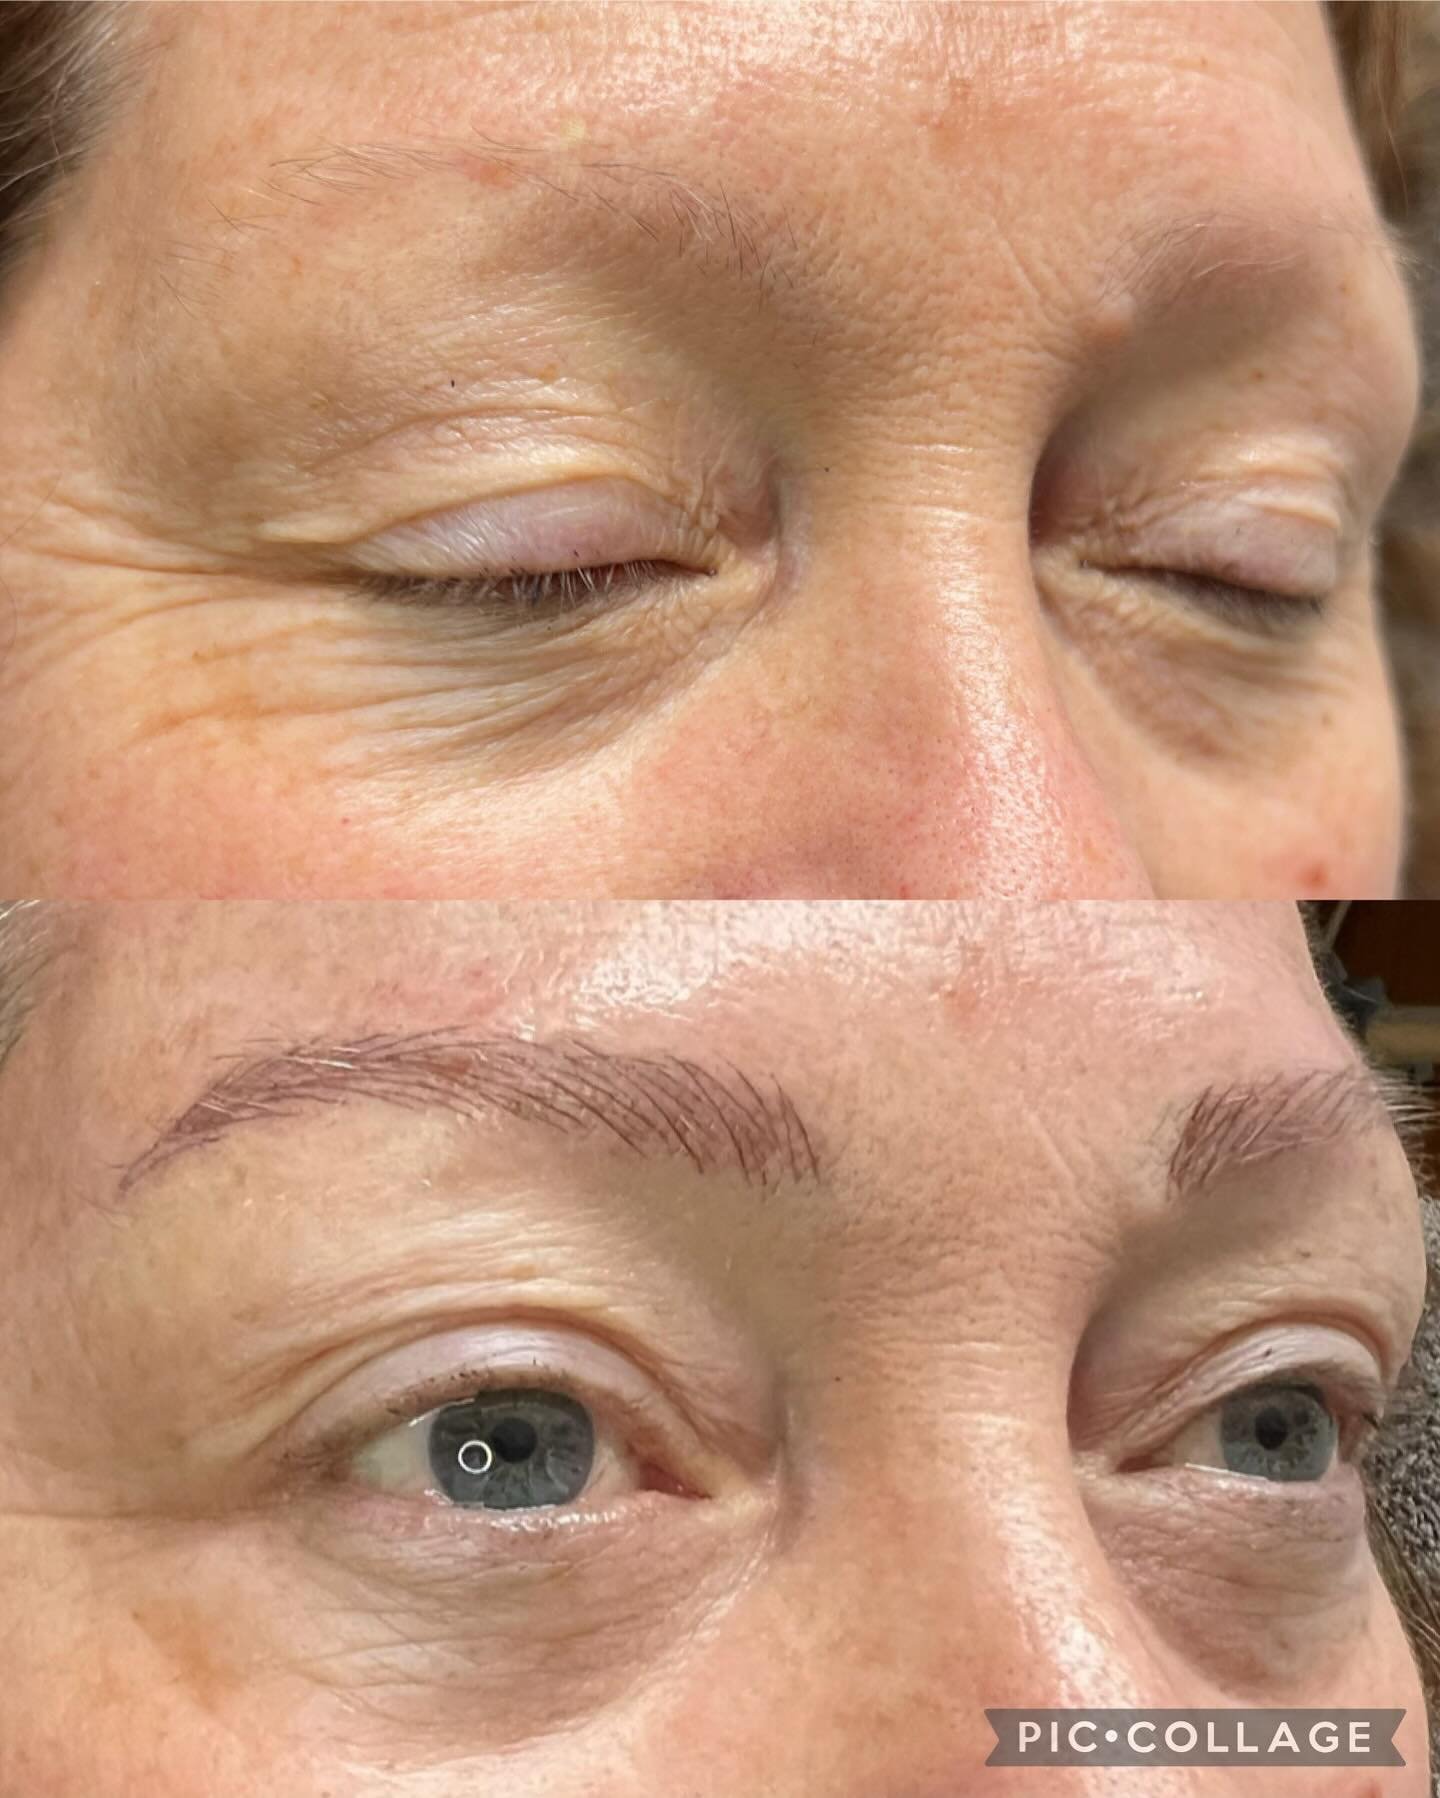 Check out this client&rsquo;s stunning transformation with our subtle microblading technique! She wanted a natural look and are over the moon with the results! 😍 #SubtleBrows #happyclients #SemiPermanentMakeup Check out this client&rsquo;s stunning 